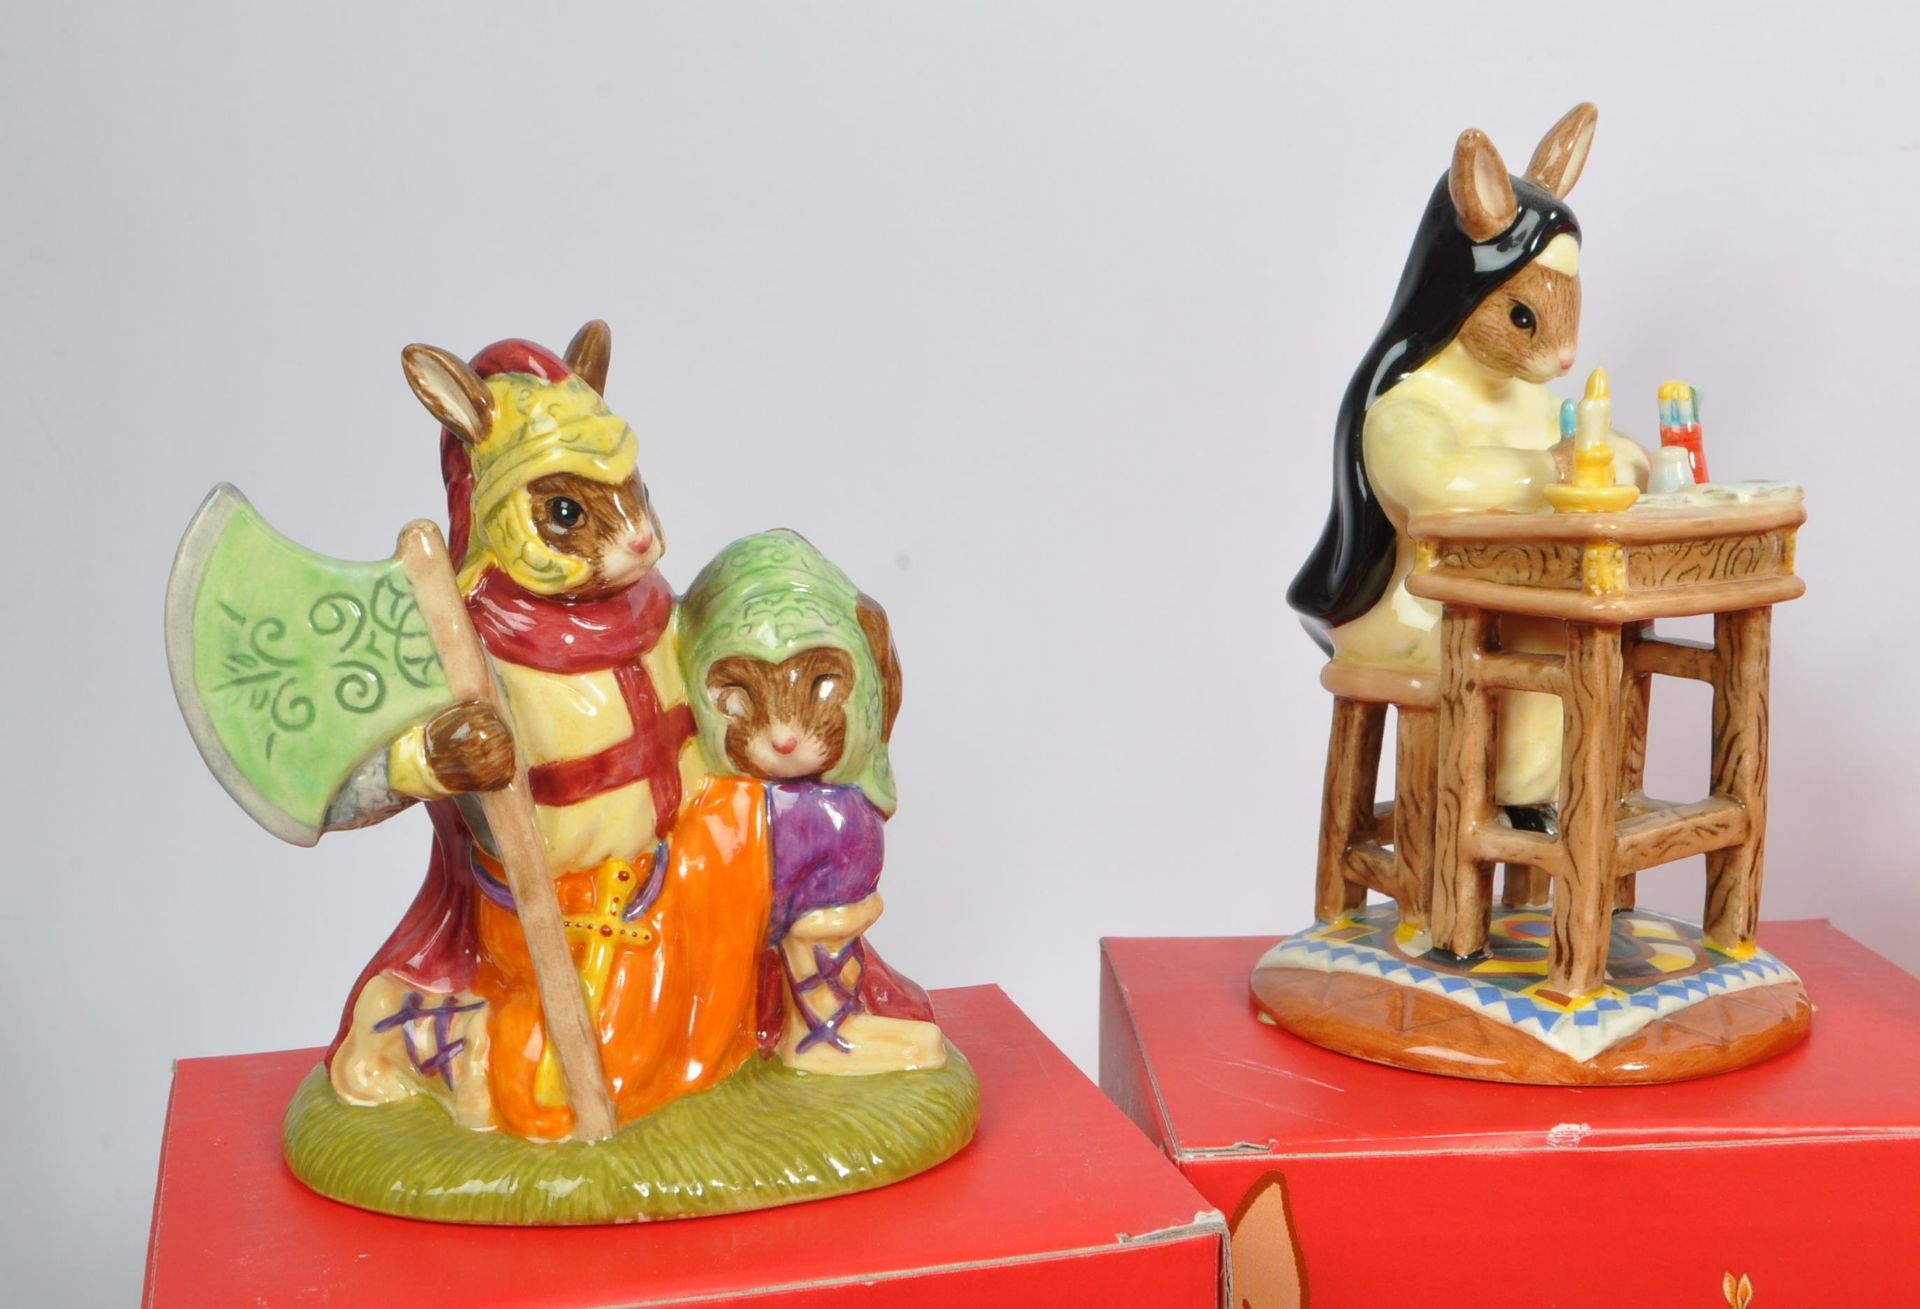 ROYAL DOULTON - BUNNYKINS - COLLECTION OF PORCELAIN FIGURES - Image 3 of 6